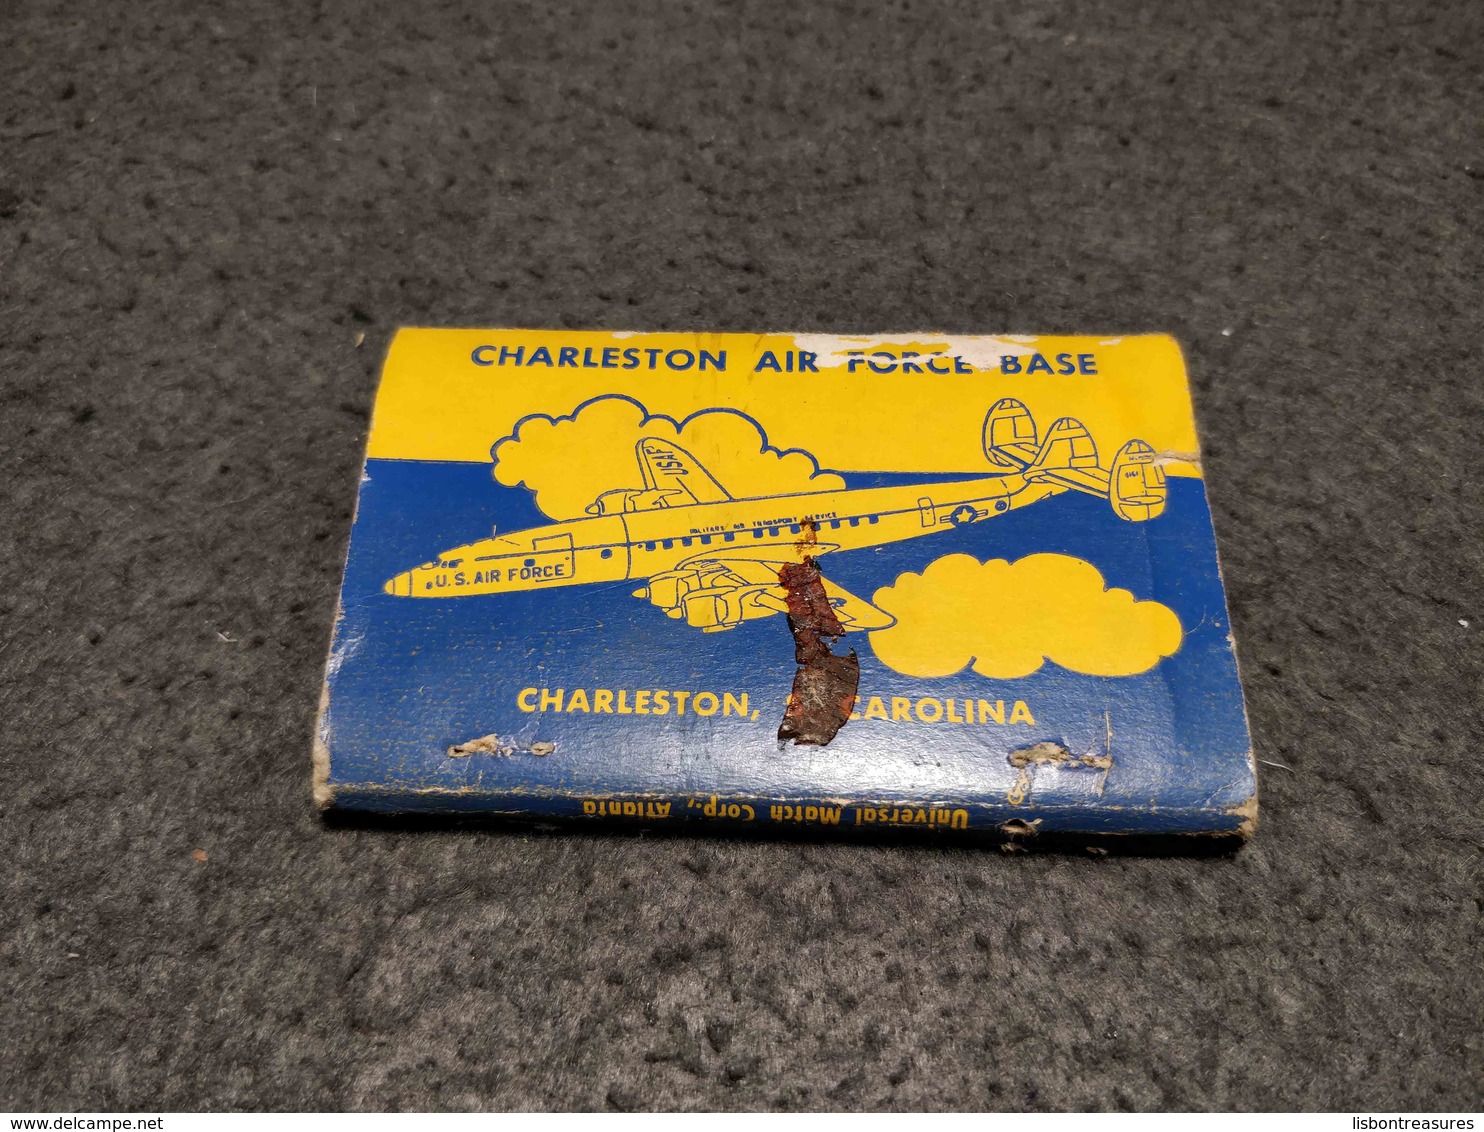 ANTIQUE MATCHBOX MATCHES LABEL ADVERTISING CHARLESTON AIR FORCE BASE MILITARY UNITED STATES - Scatole Di Fiammiferi